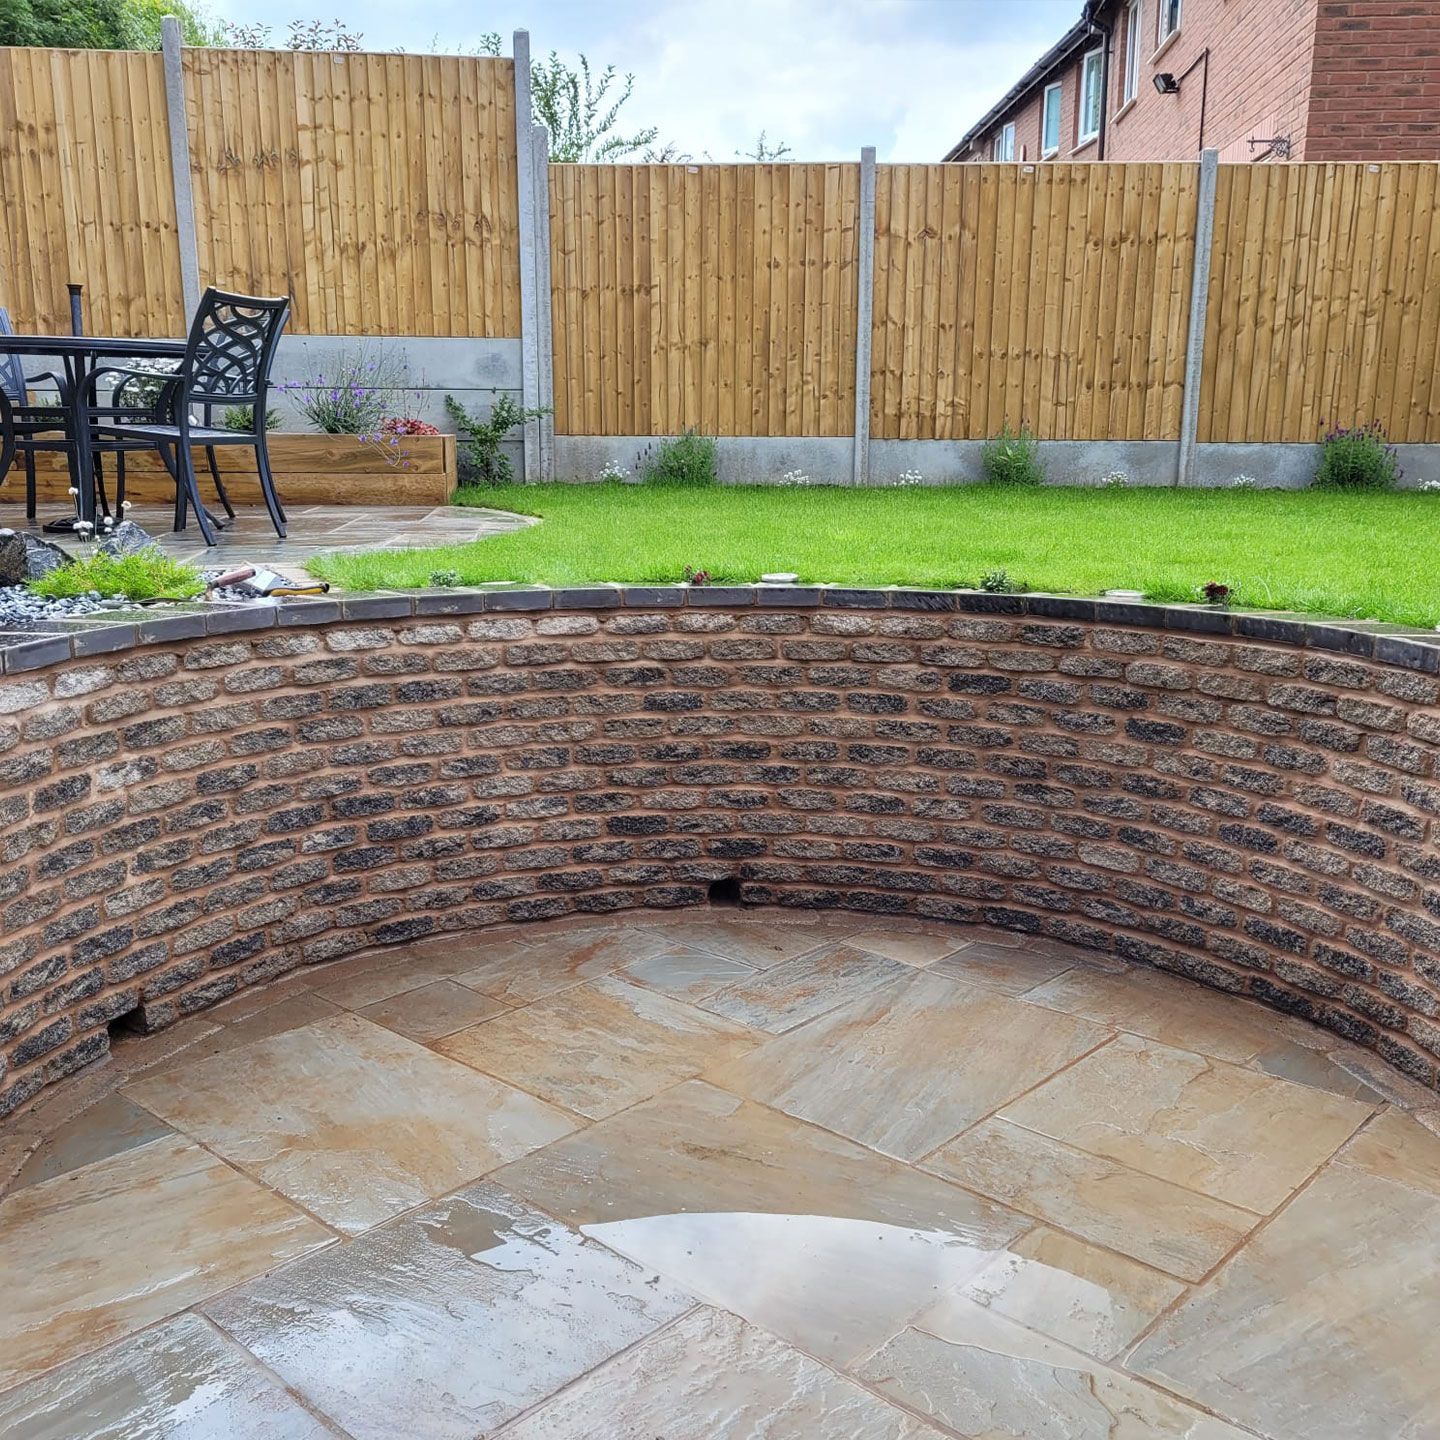 Landscaping services Kenilworth a retaining garden wall